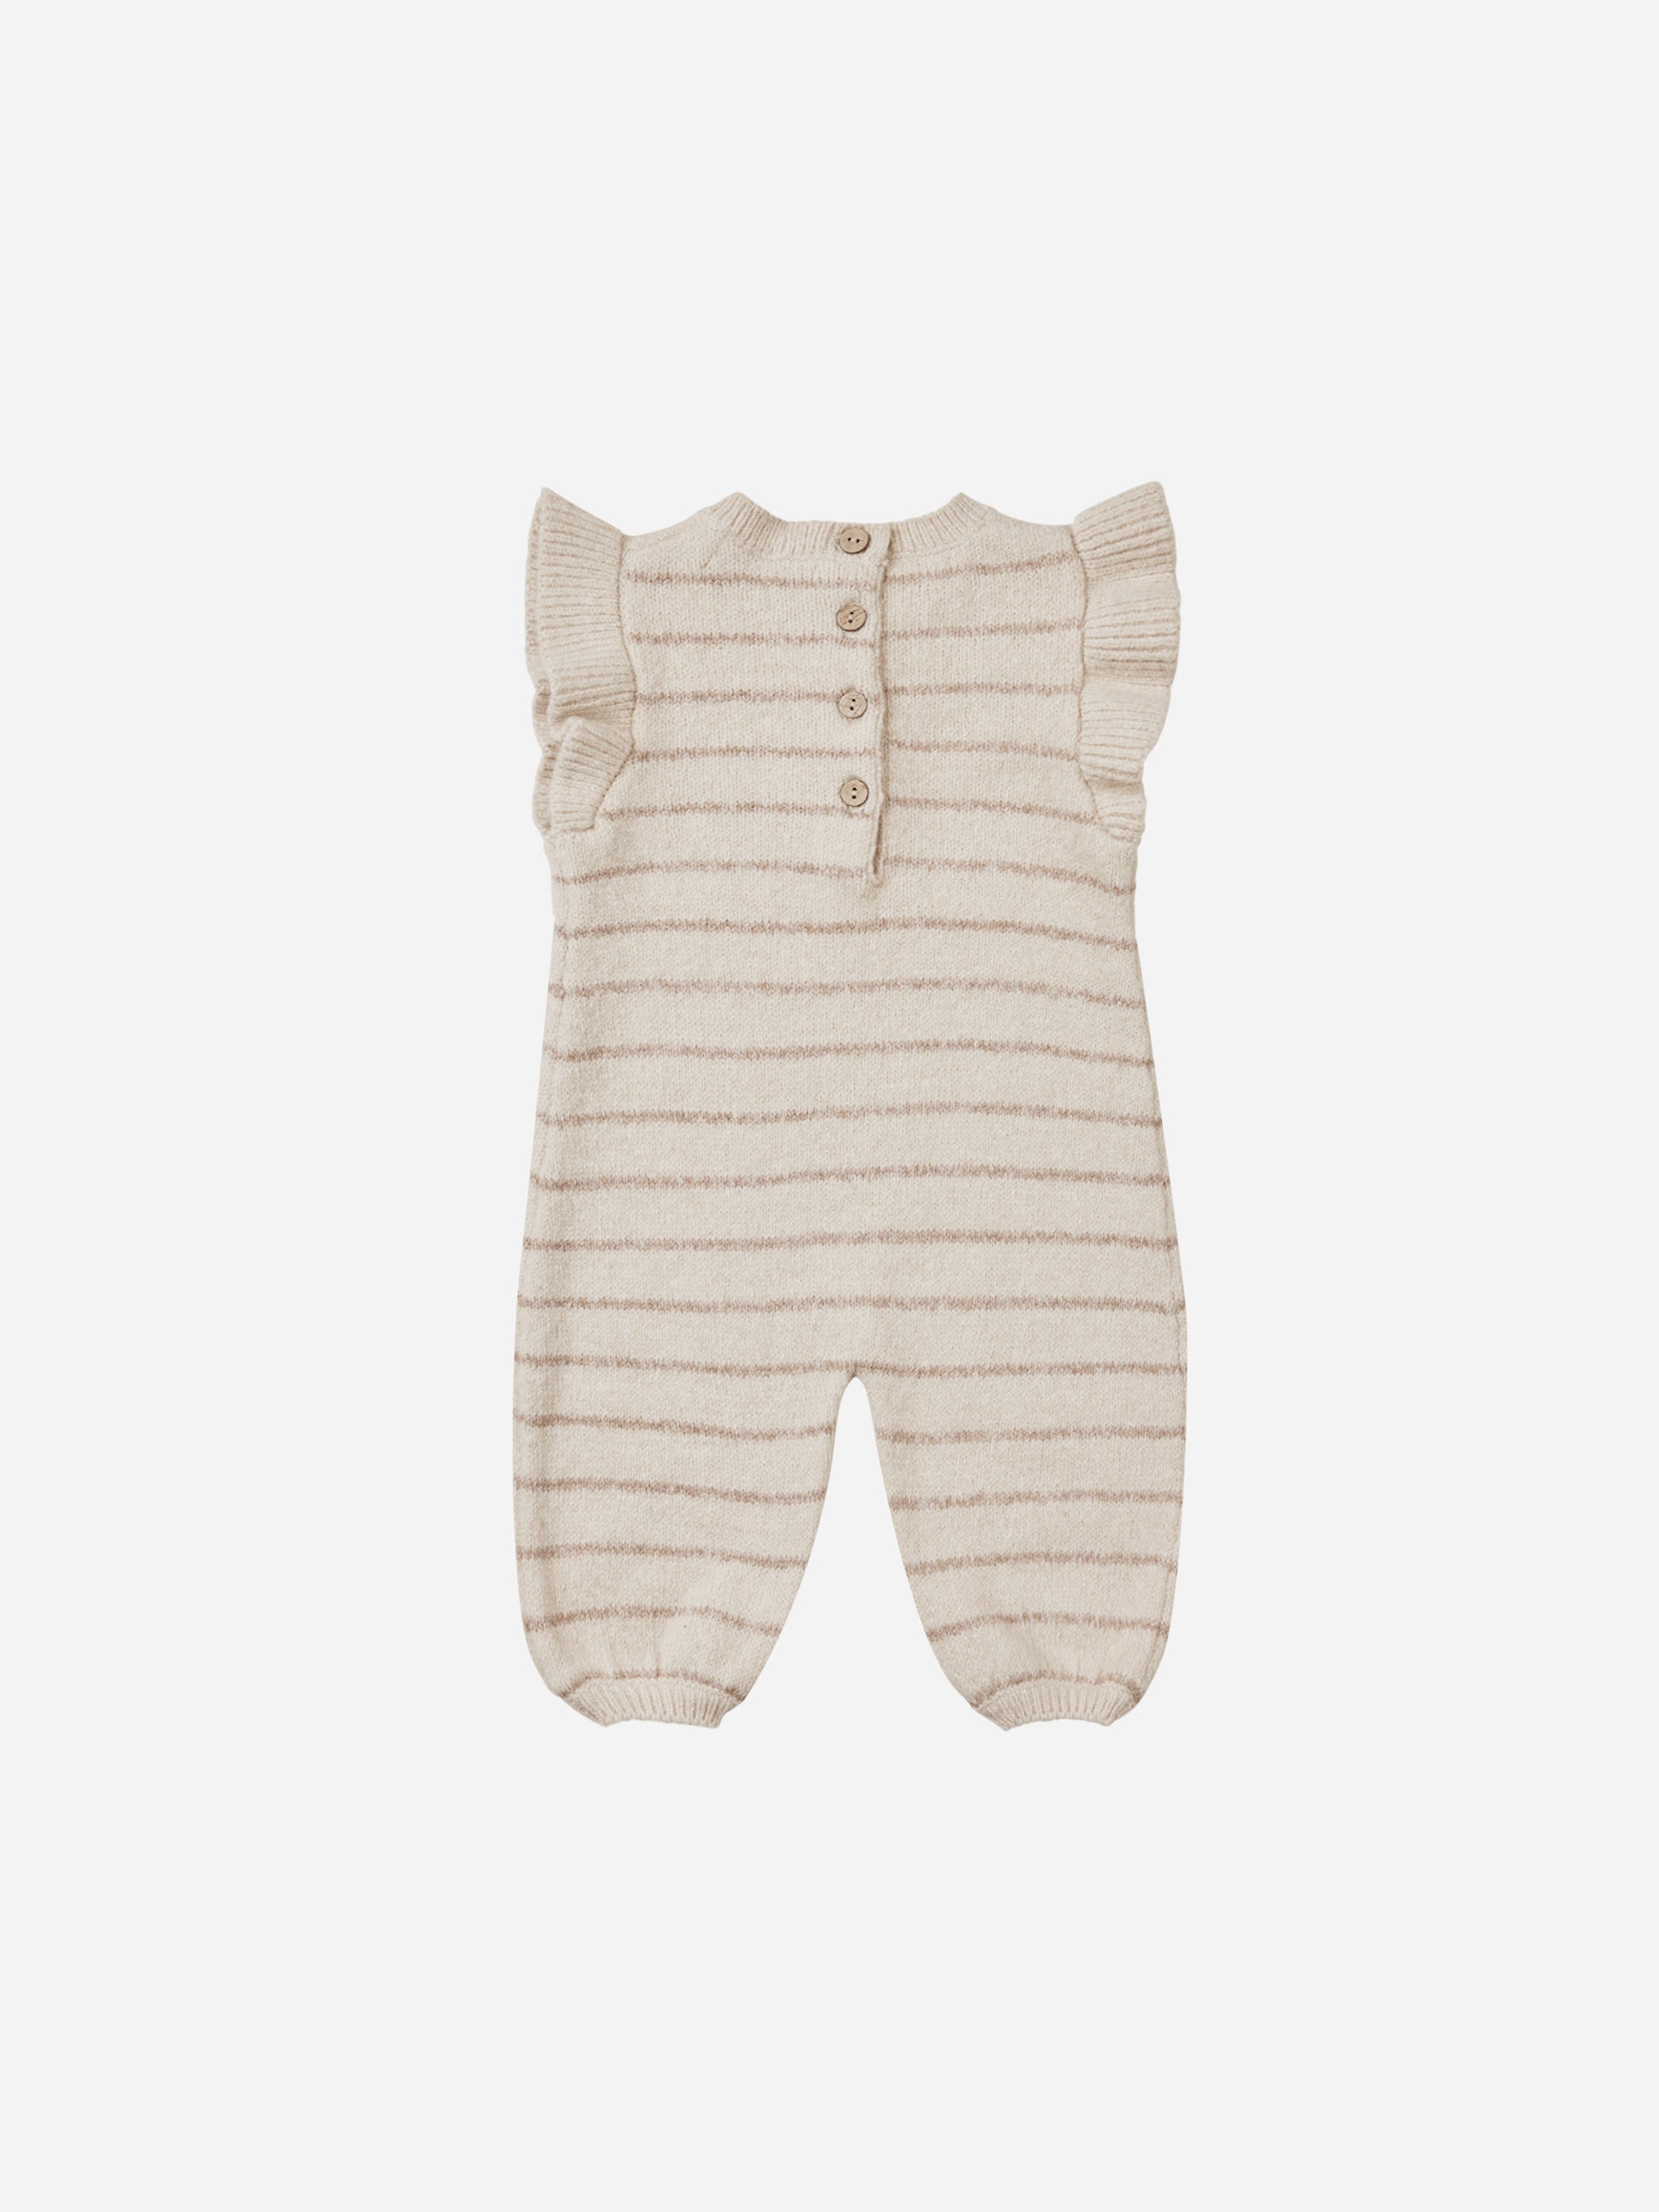 Mira Knit Romper || Heathered Oat Stripe - Rylee + Cru | Kids Clothes | Trendy Baby Clothes | Modern Infant Outfits |